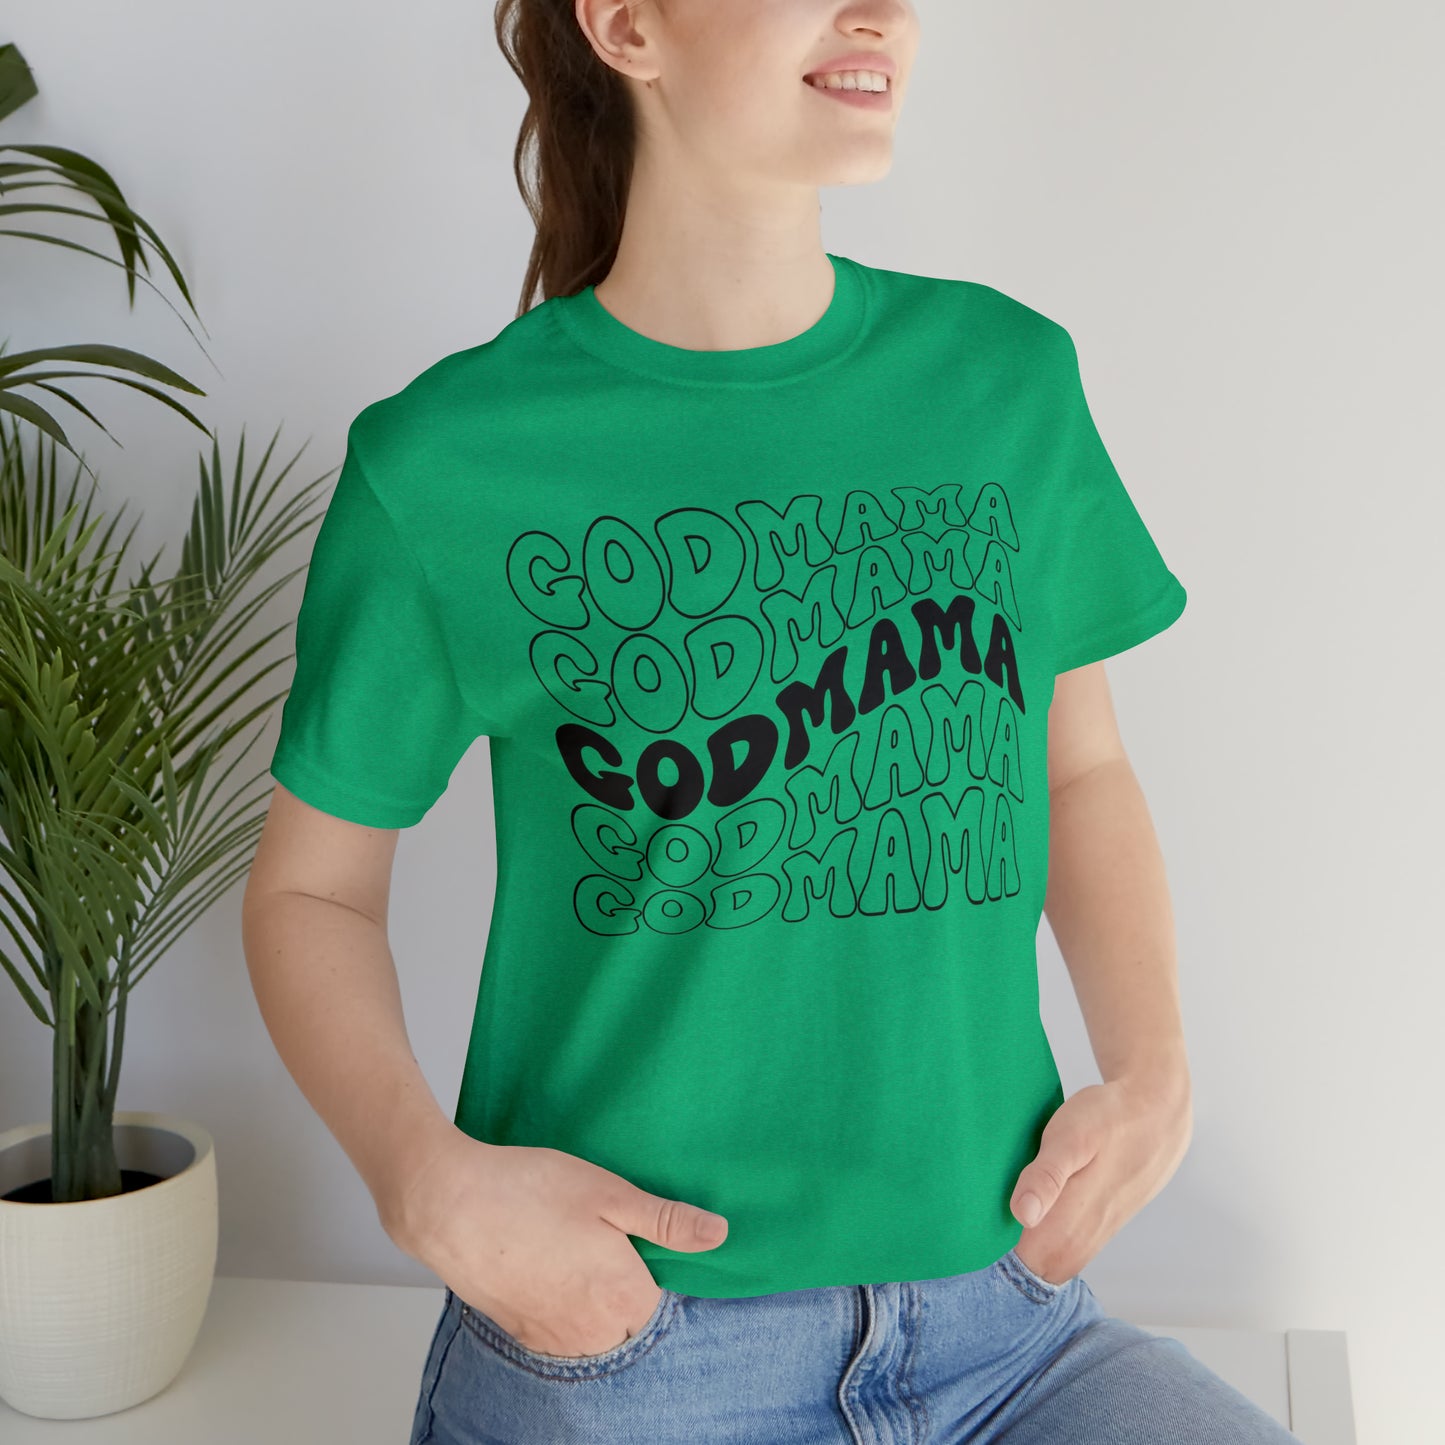 Retro Godmother Shirt for Mother's Day, Godmother Gift from Goddaughter, Cute Godmama Gift for Baptism, God Mother Proposal, T251